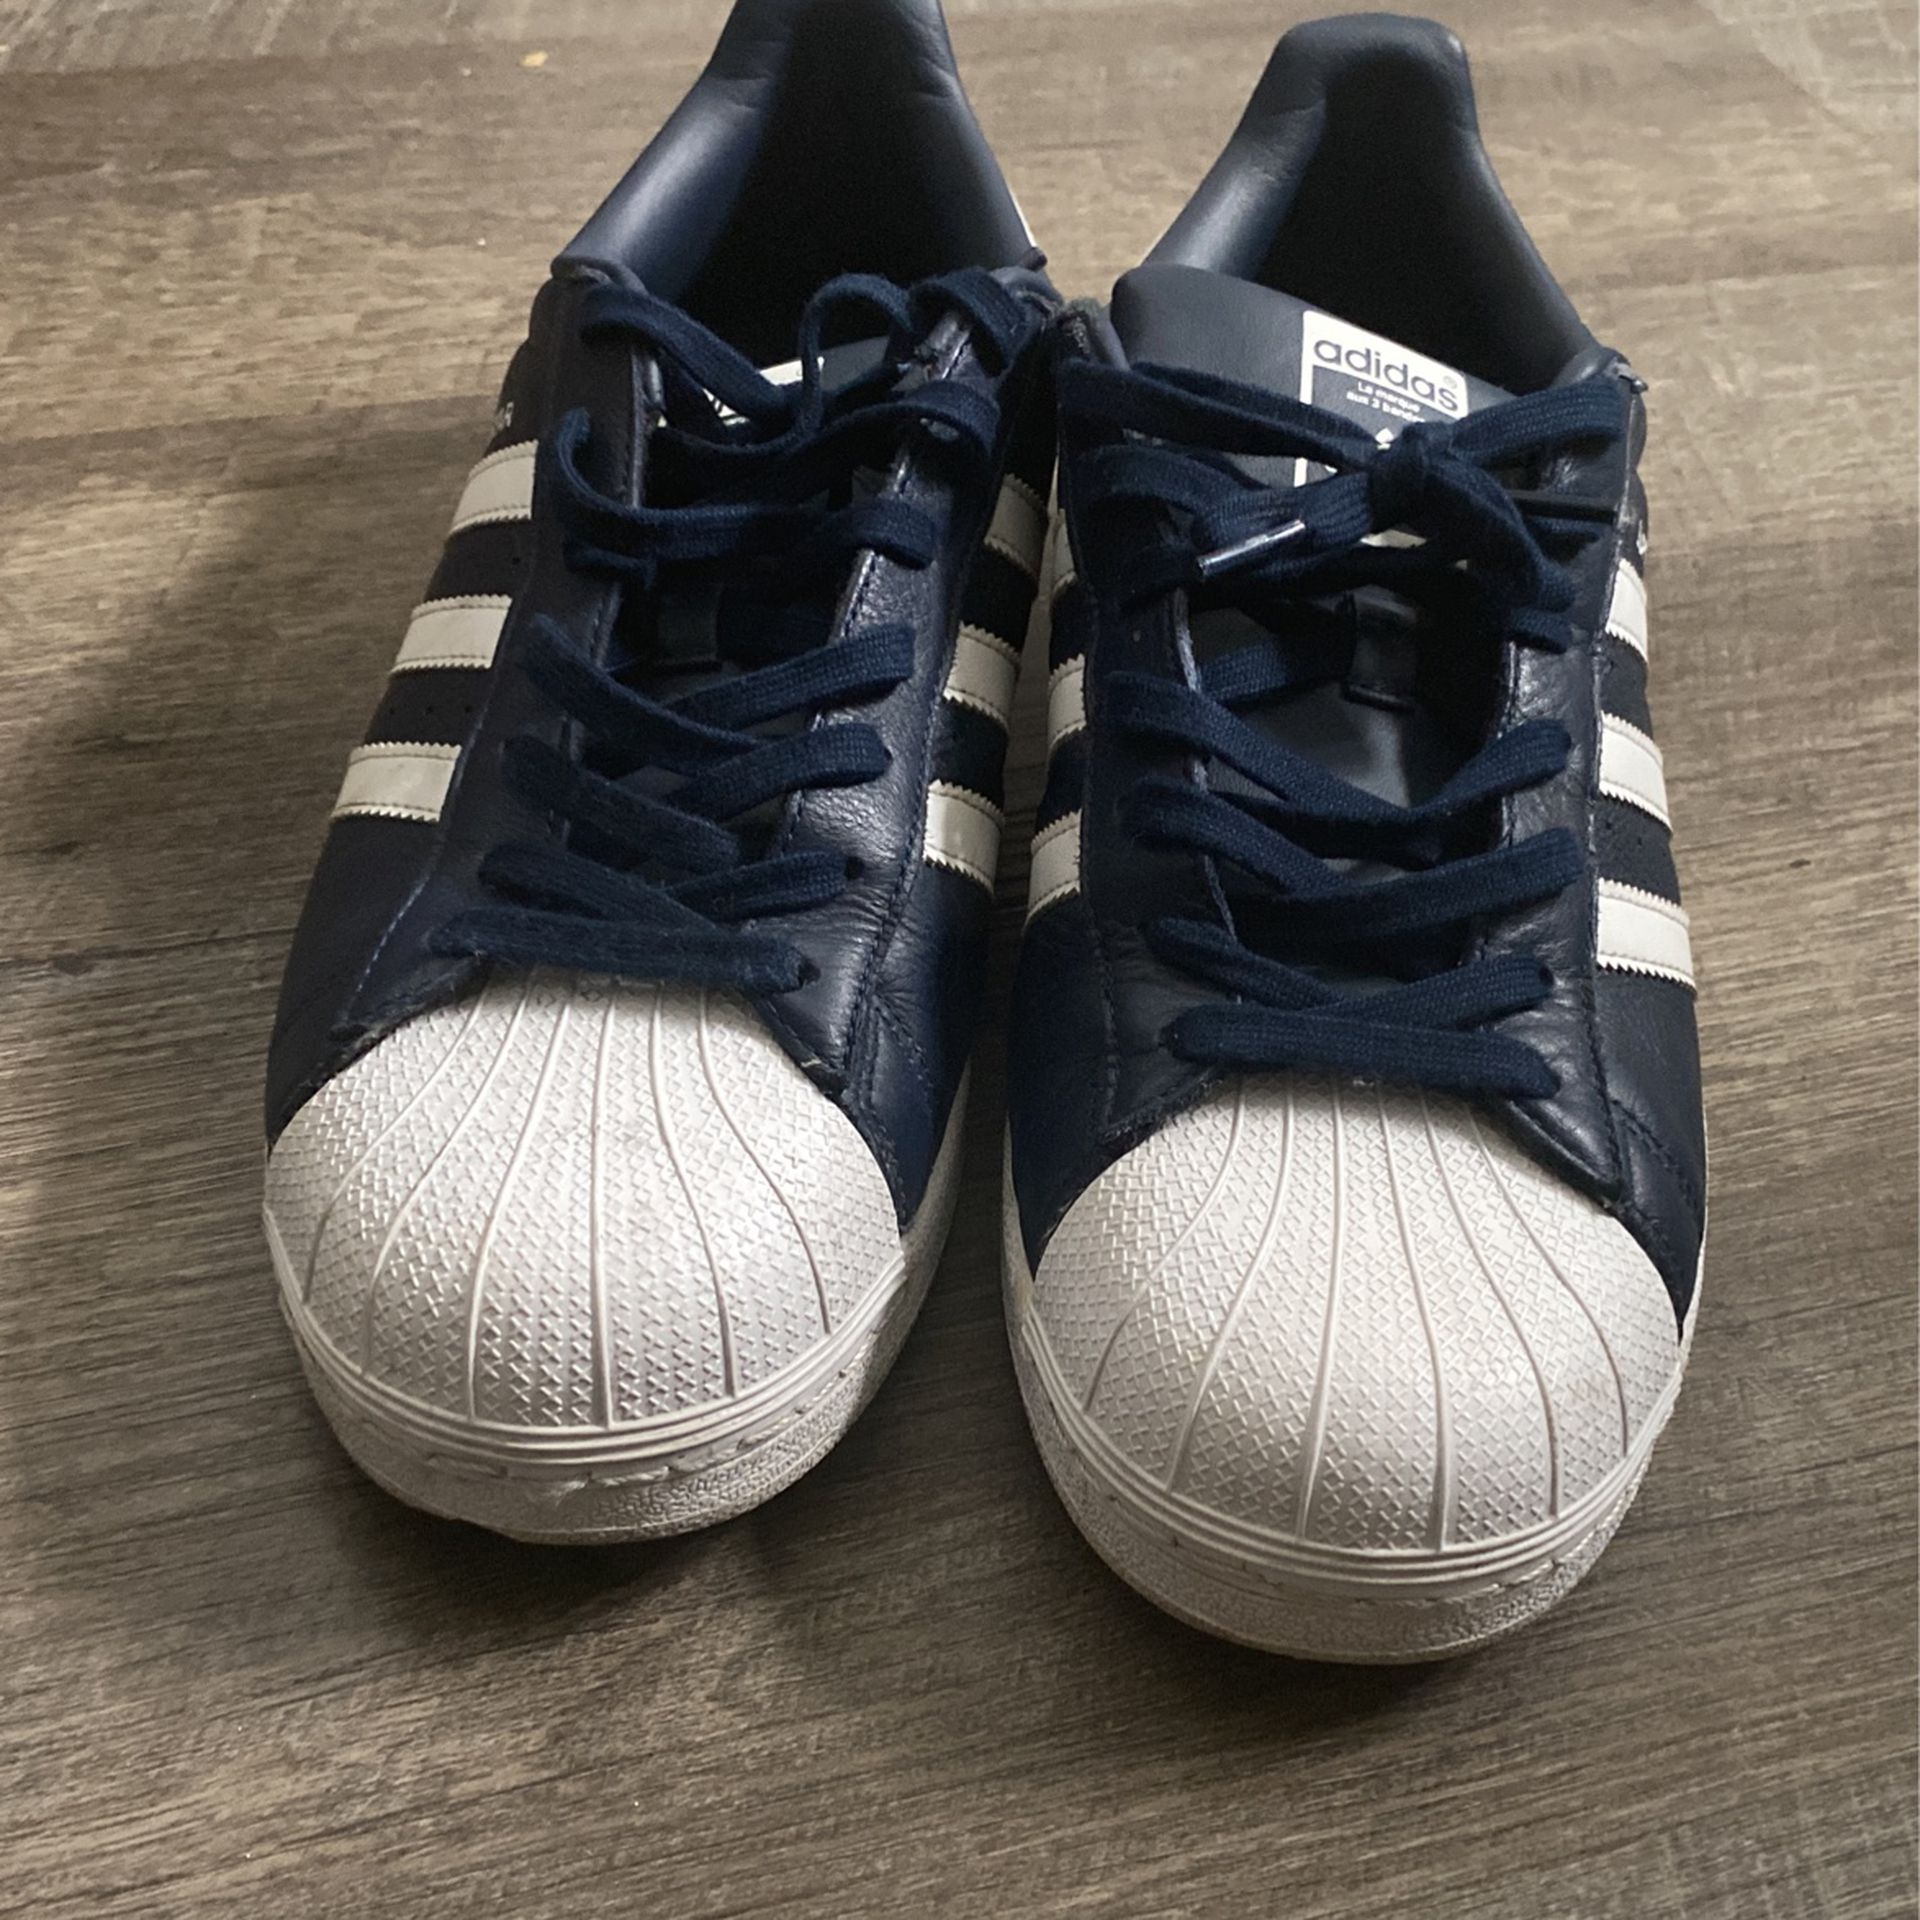 Navy Blue Adidas Shell Toes